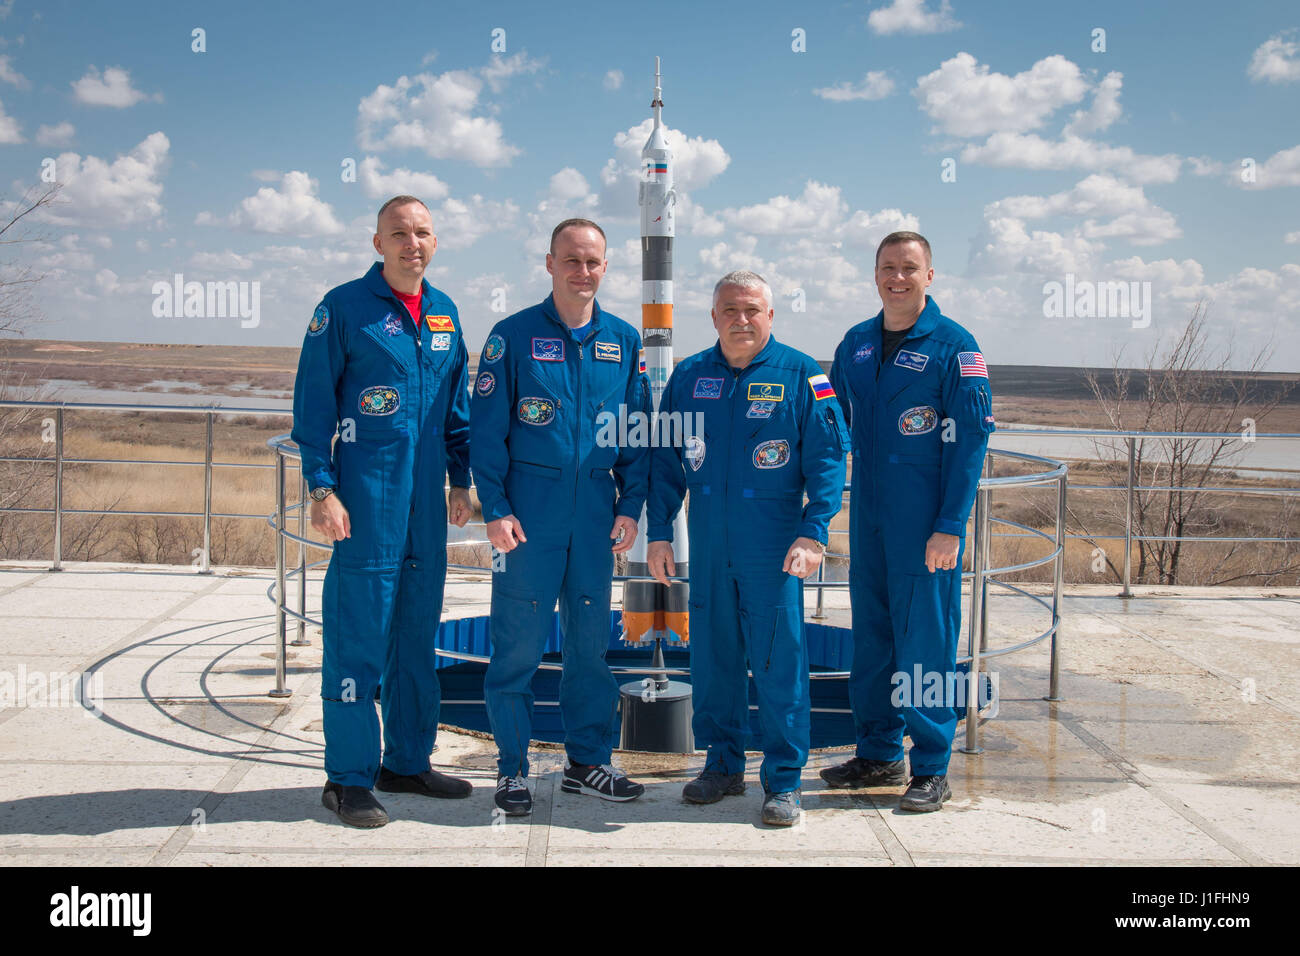 NASA International Space Station Expedition 51 Soyuz MS-04 mission prime and backup crew members (L-R) American astronaut Randy Bresnik, Russian cosmonauts Sergey Ryazanskiy and Fyodor Yurchikhin of Roscosmos, and American astronaut Jack Fischer pose for photos during pre-launch activities at the Cosmonaut Hotel April 13, 2017 in Baikonur, Kazakhstan.       (photo by Victor Zelentsov /NASA   via Planetpix) Stock Photo